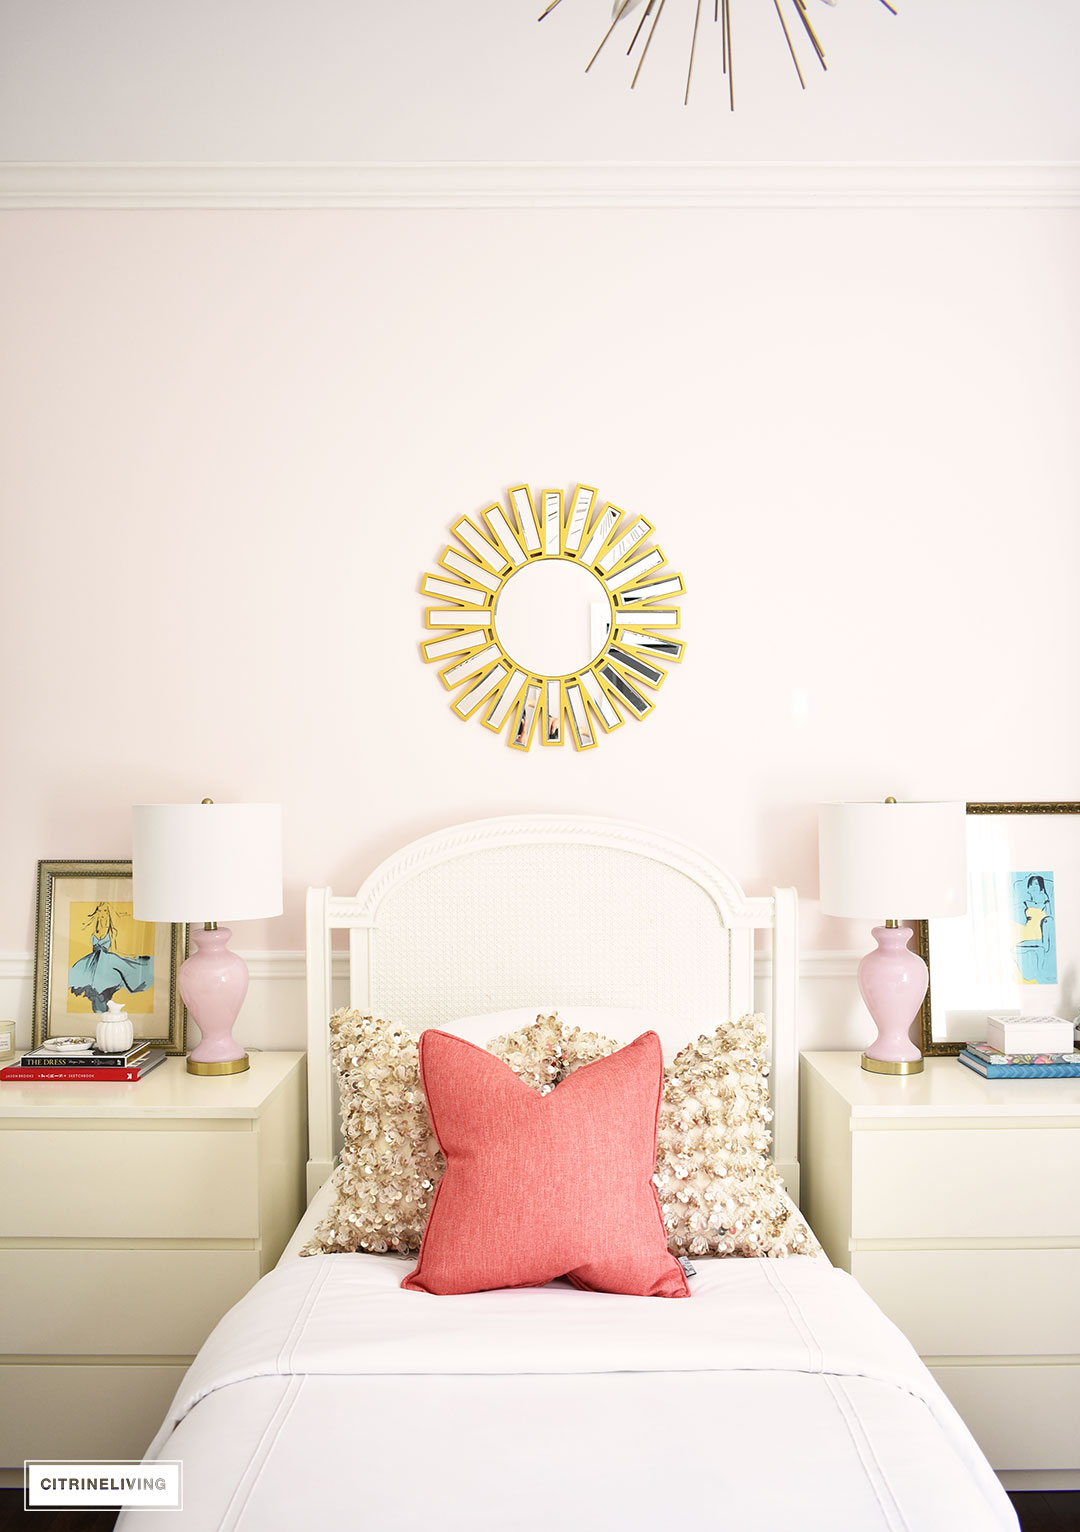 A chic, modern girl's bedroom featuring blush pink walls, coral and brass accessories and brass lighting, is a fun and sophisticated look!